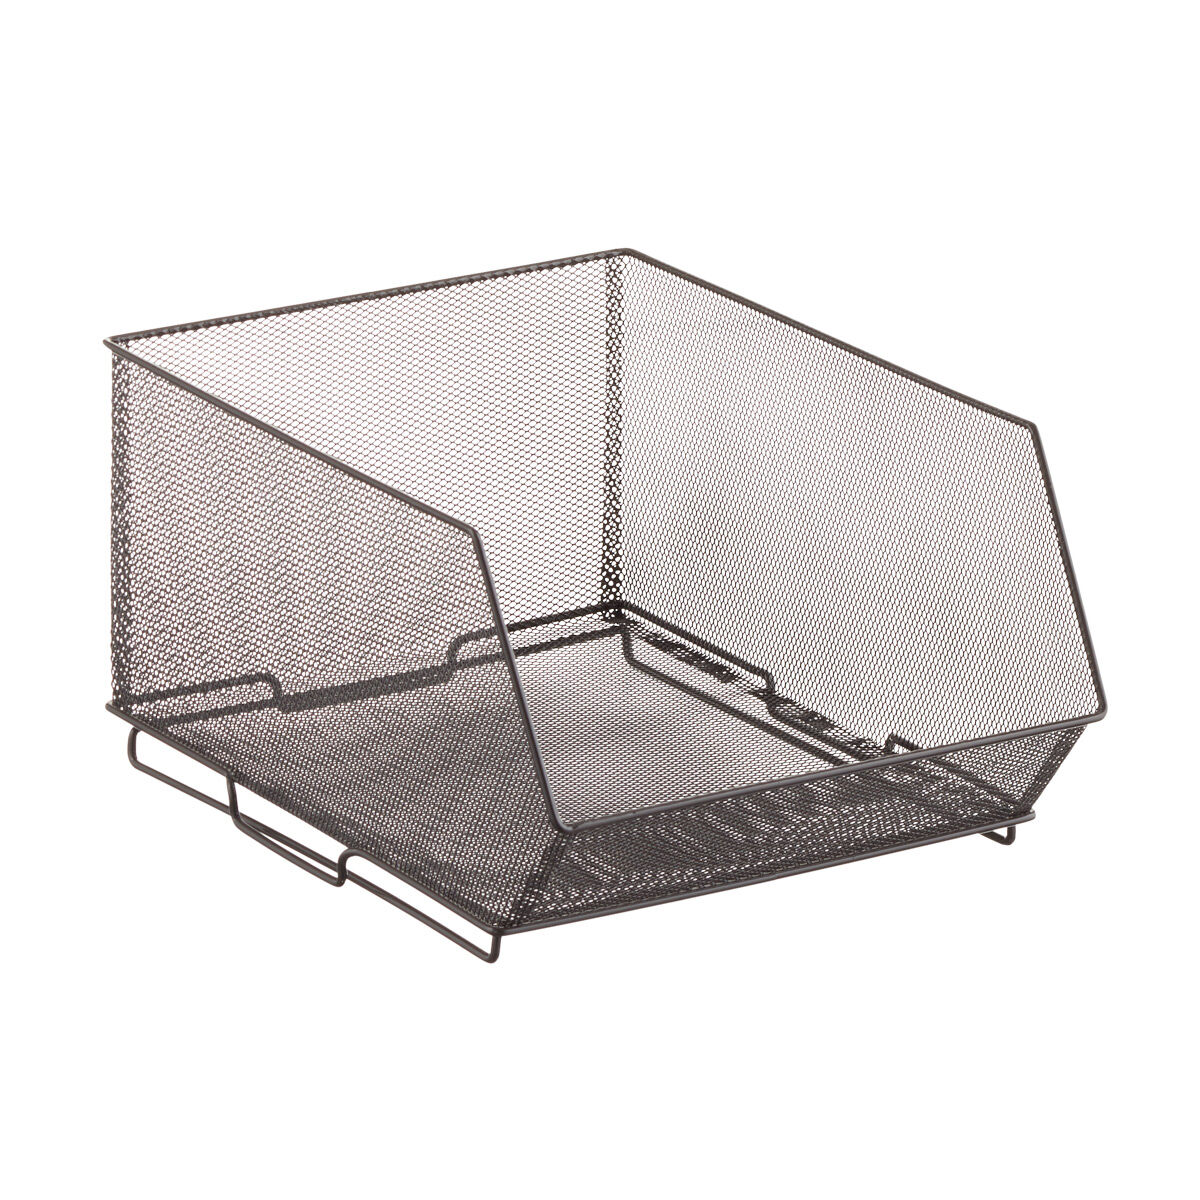 The Container Store Design Ideas Medium Open Front Mesh Stacking Bin Graphite